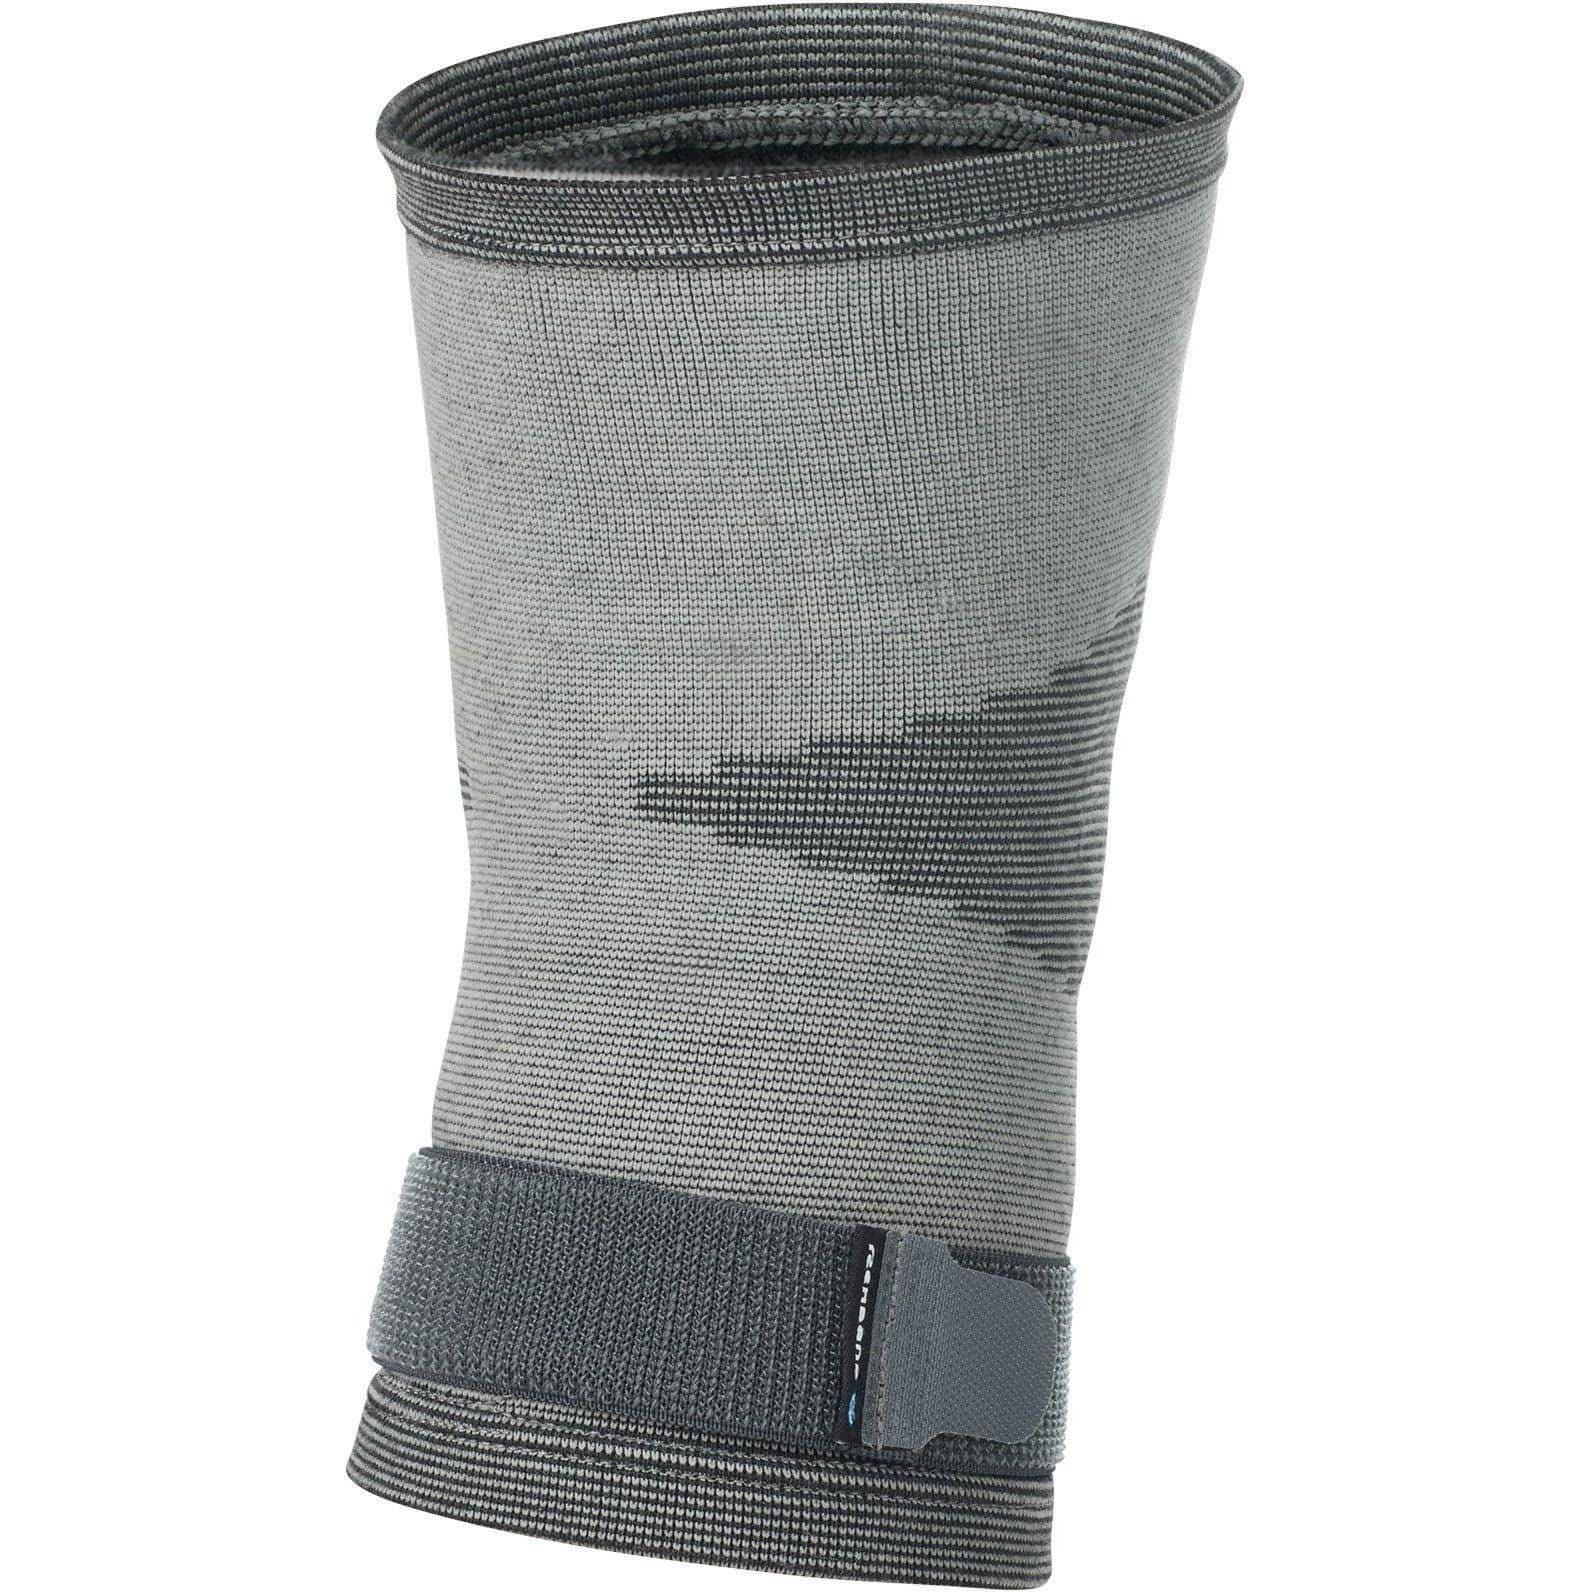 Rehband QD Knitted Knee Sleeve Support - Grey - Start Fitness